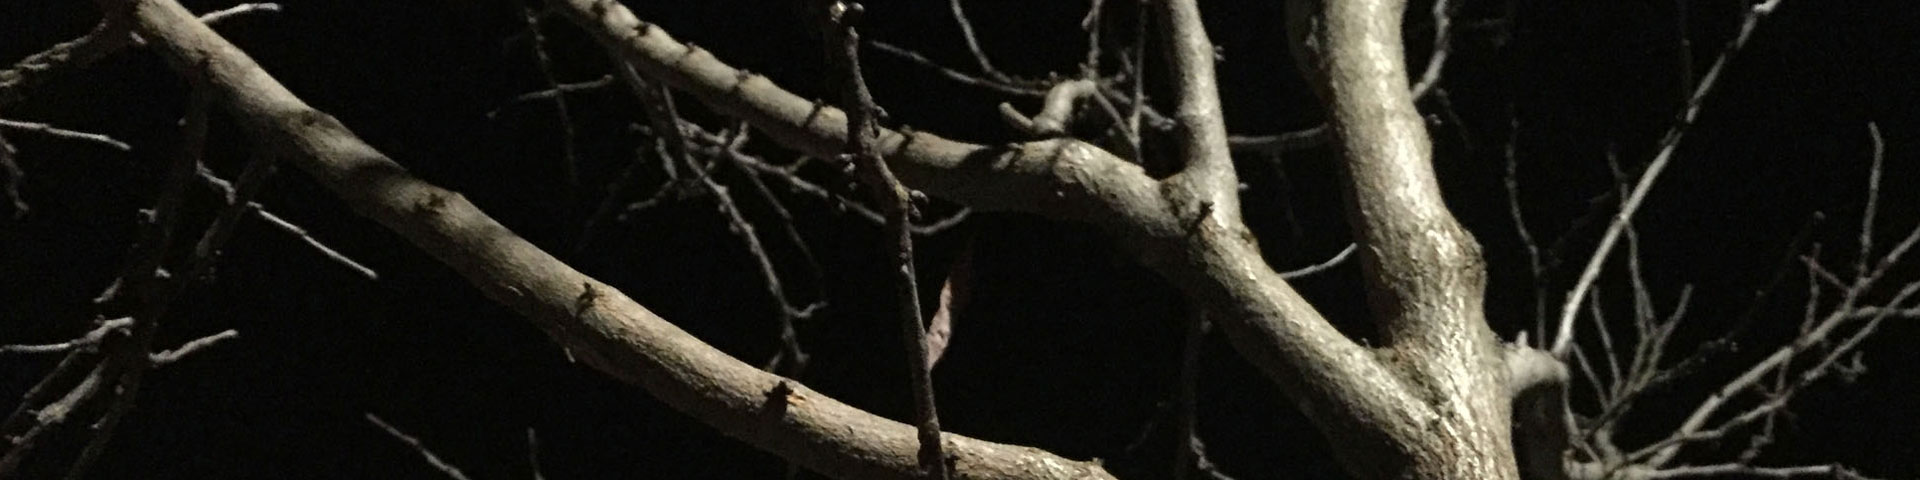 Pale white/grey tree branches stretch against the darkness.